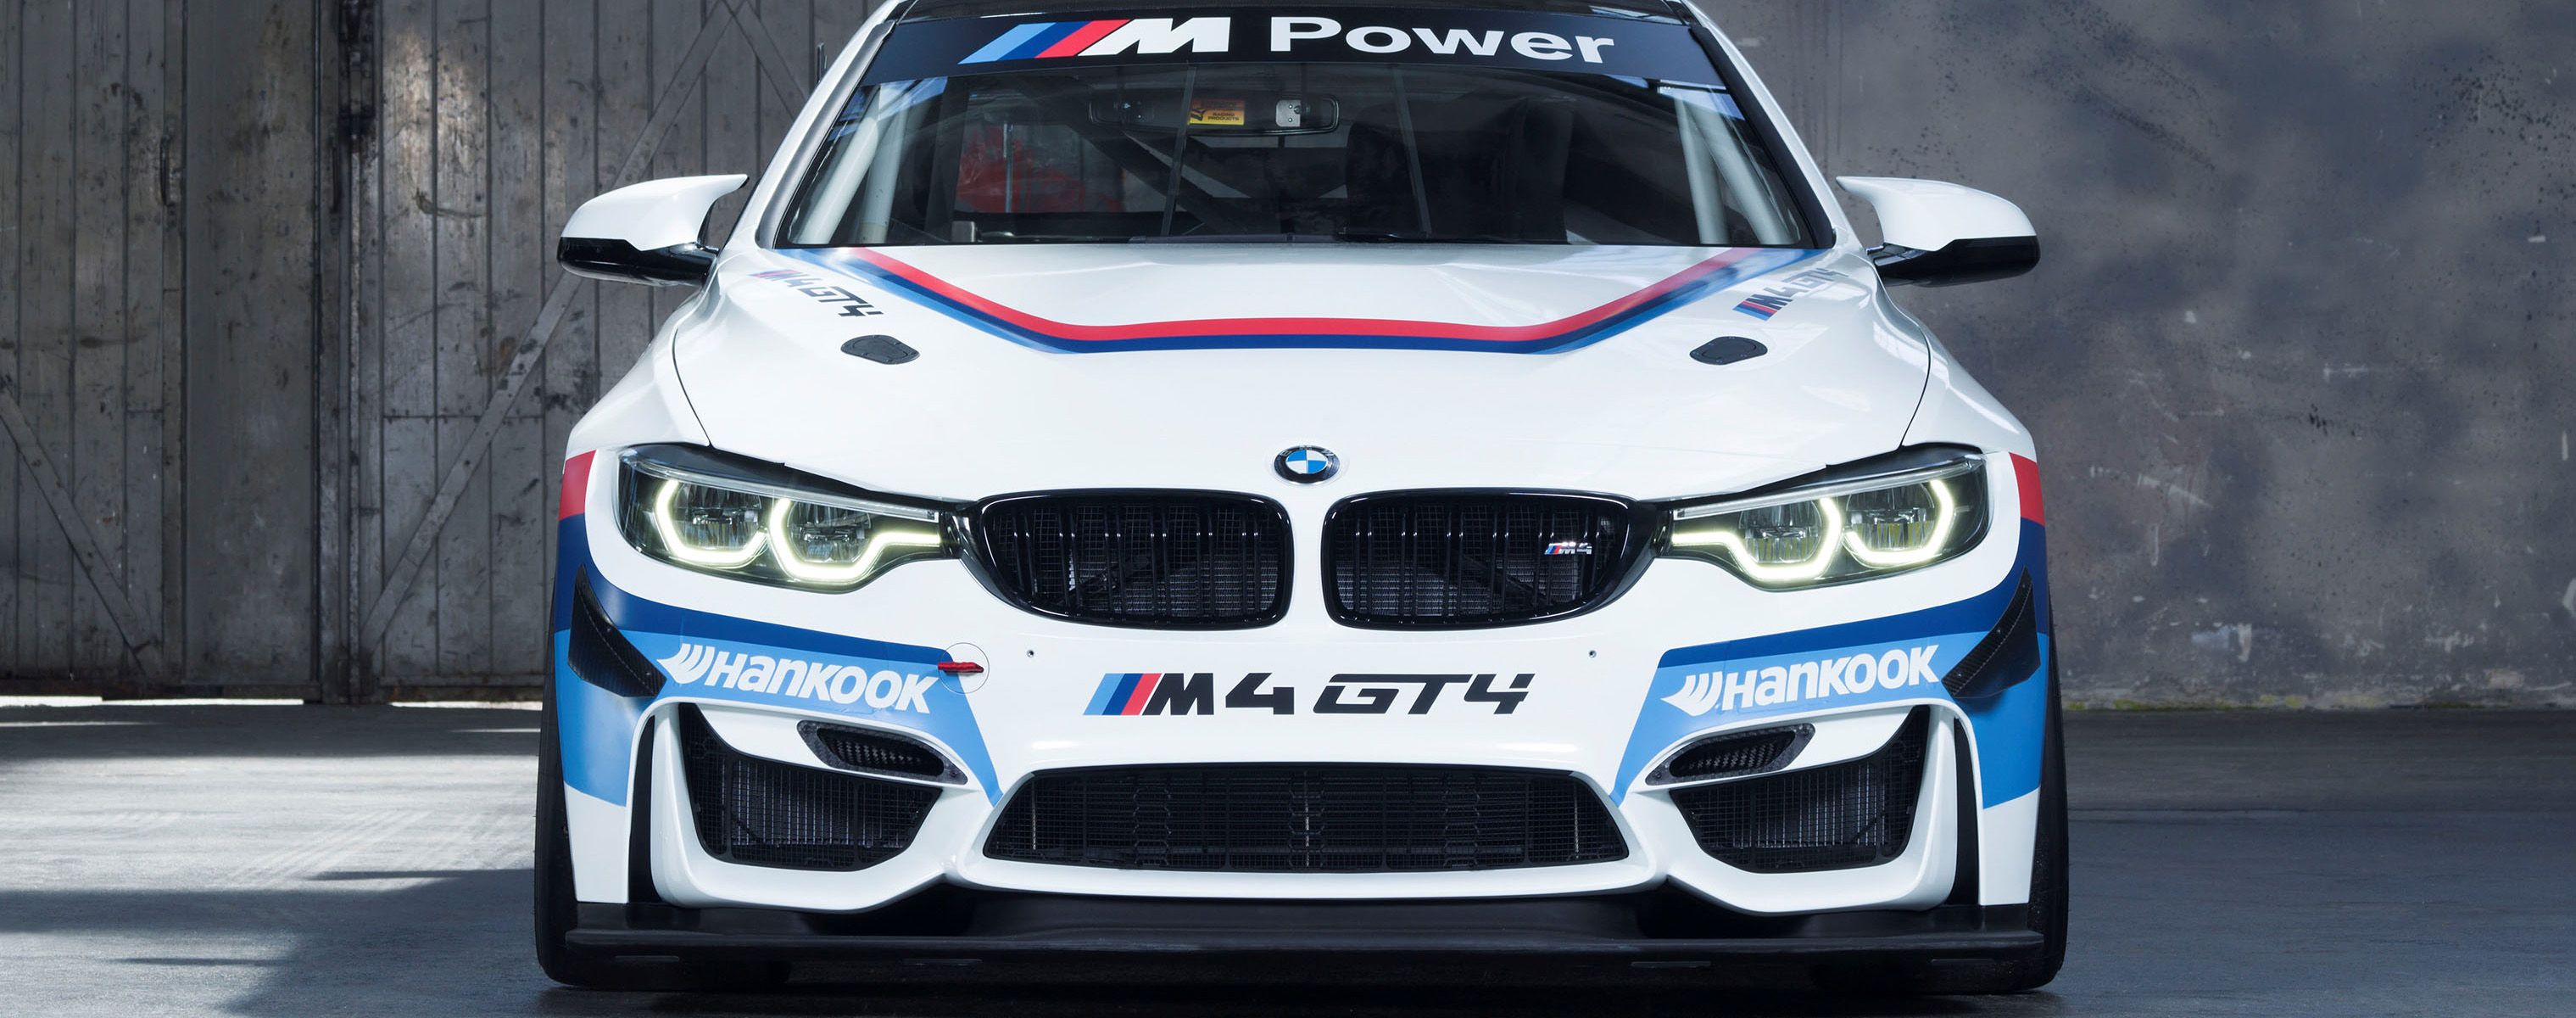 BMW M4 GT4 Race Car Now Available for Order